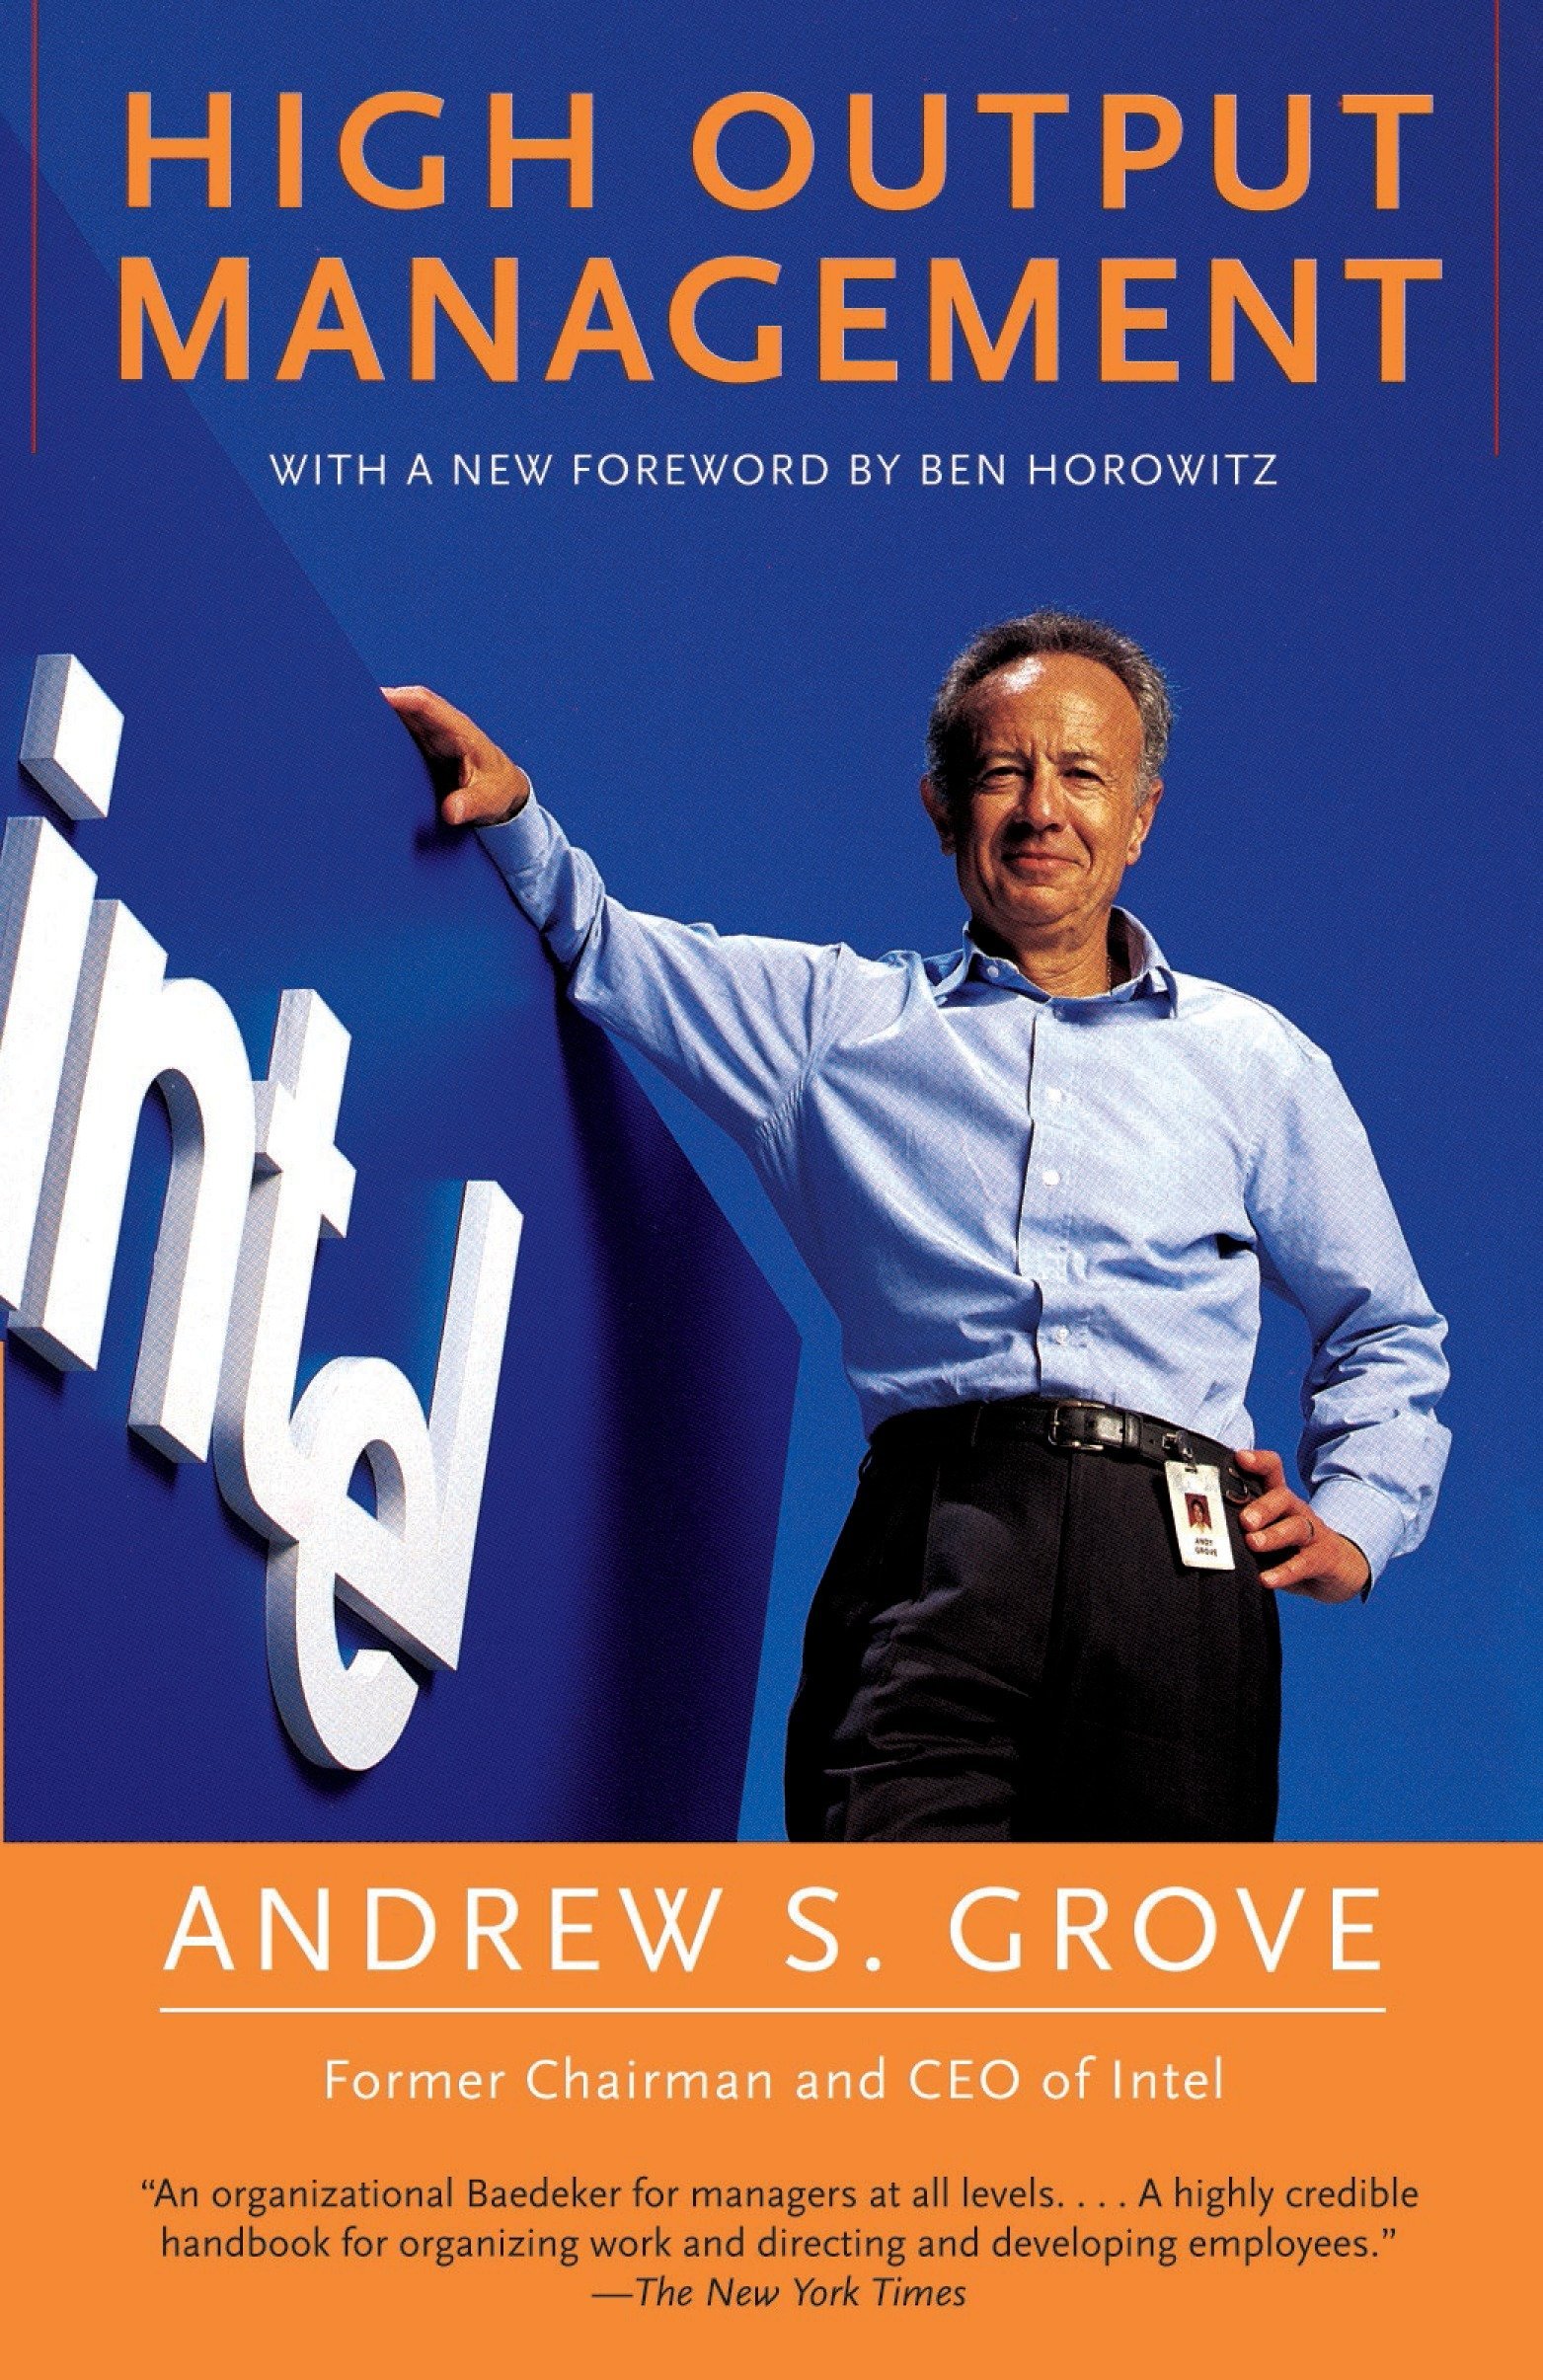 High Output Managment by Andy Grove